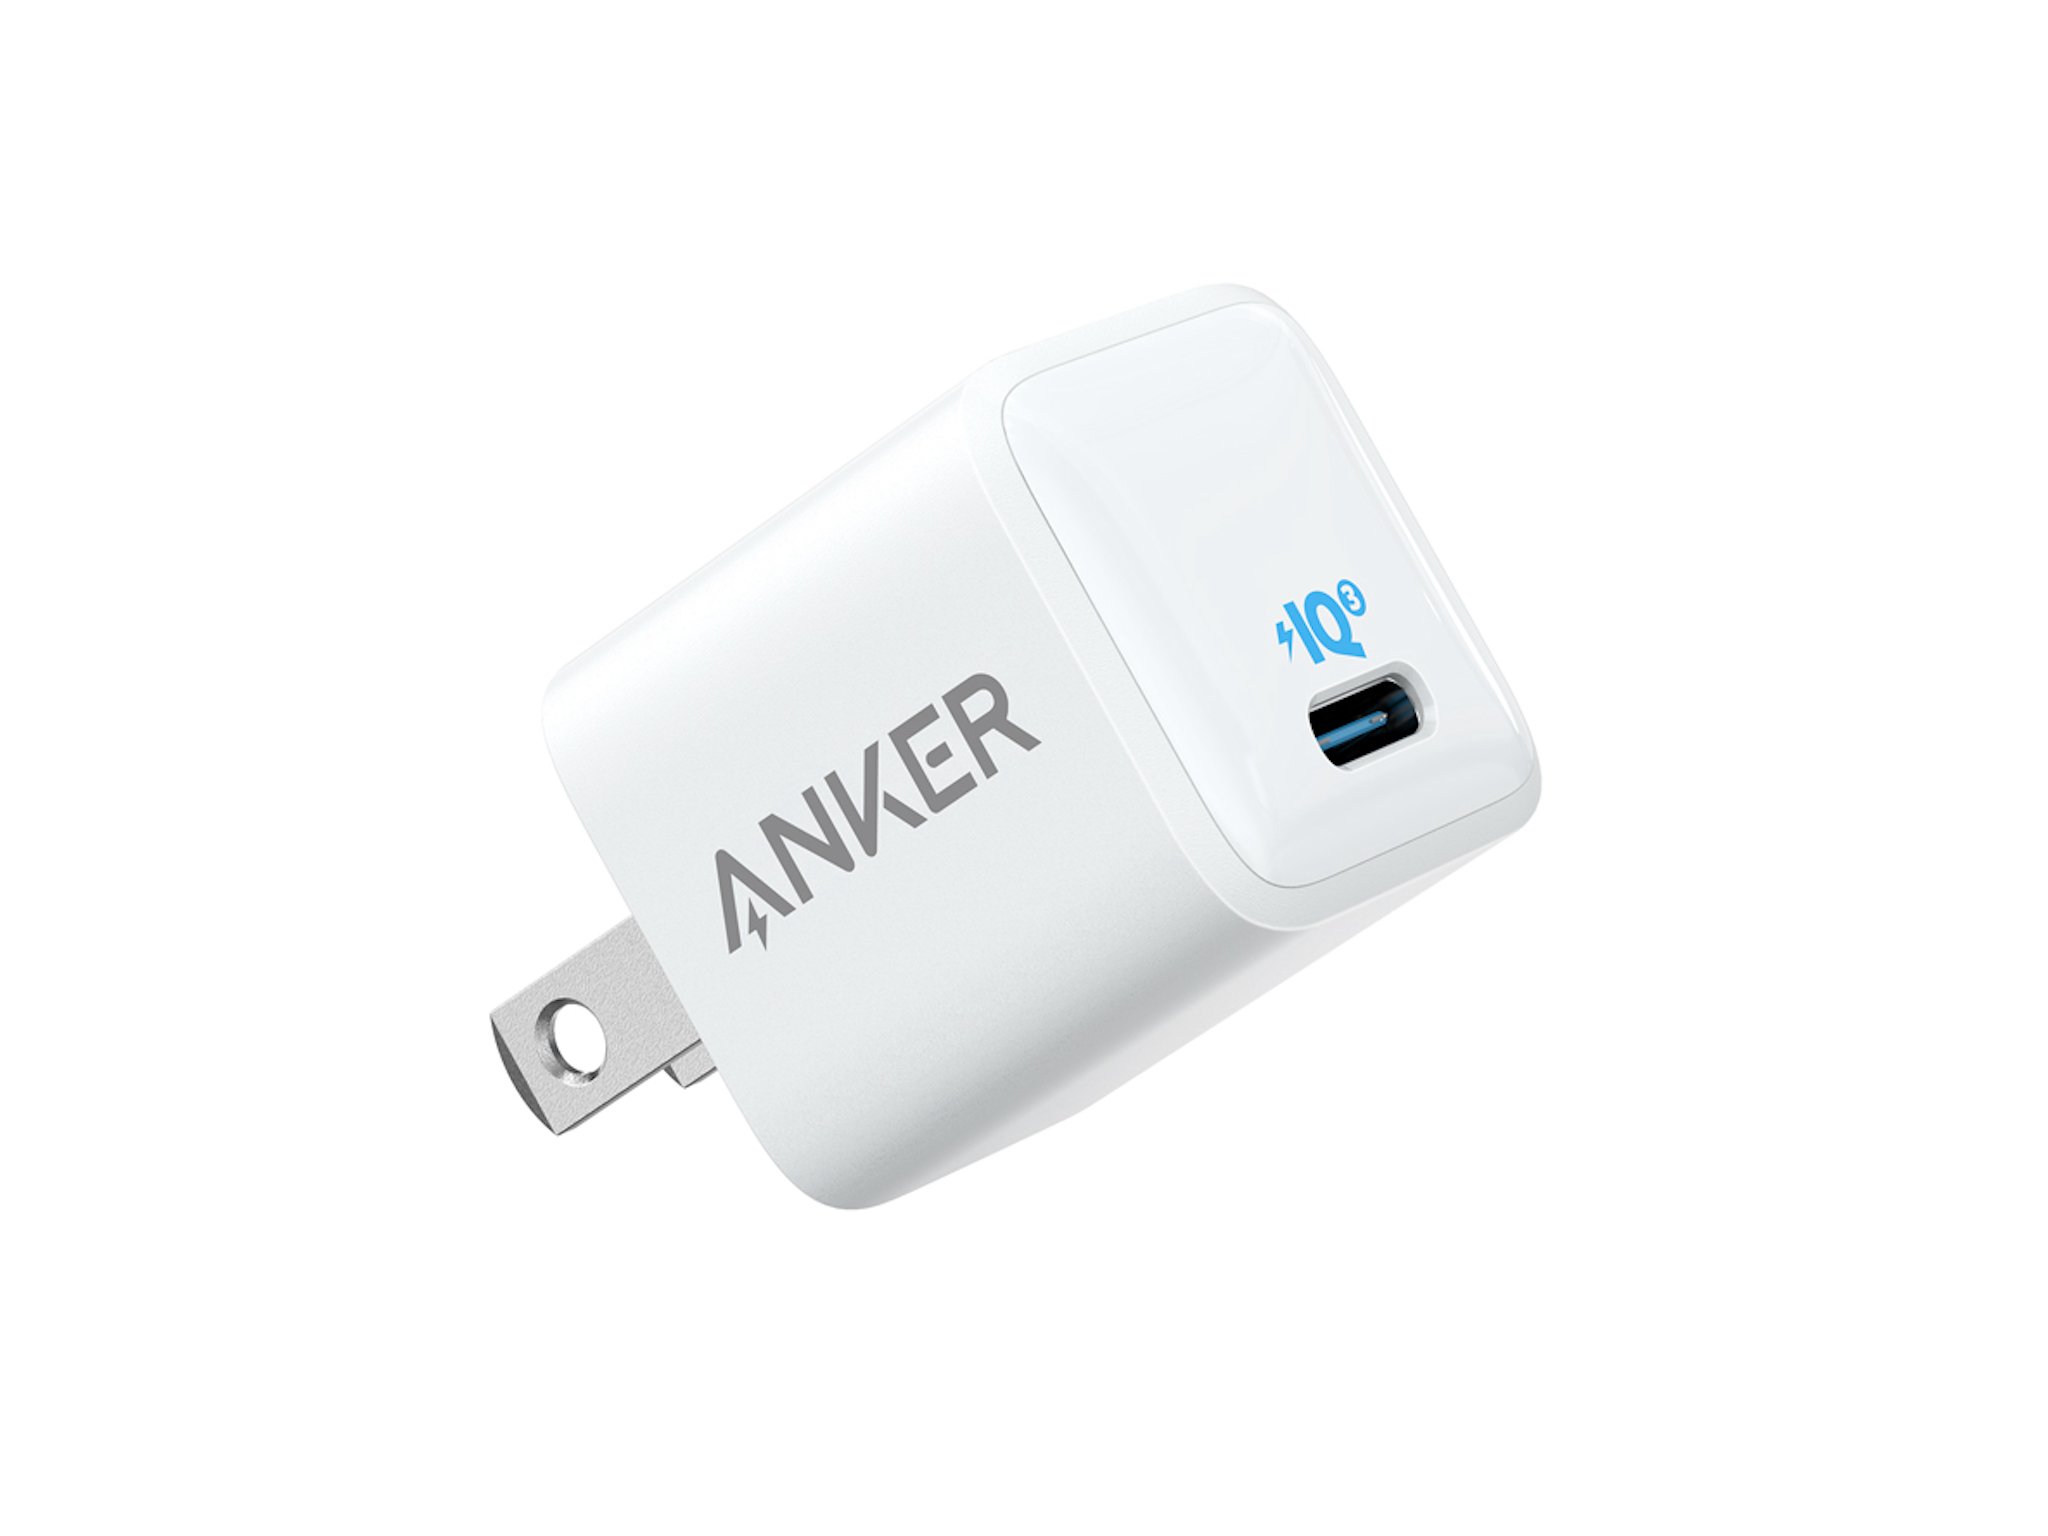 anker-charger-clear-large.jpg